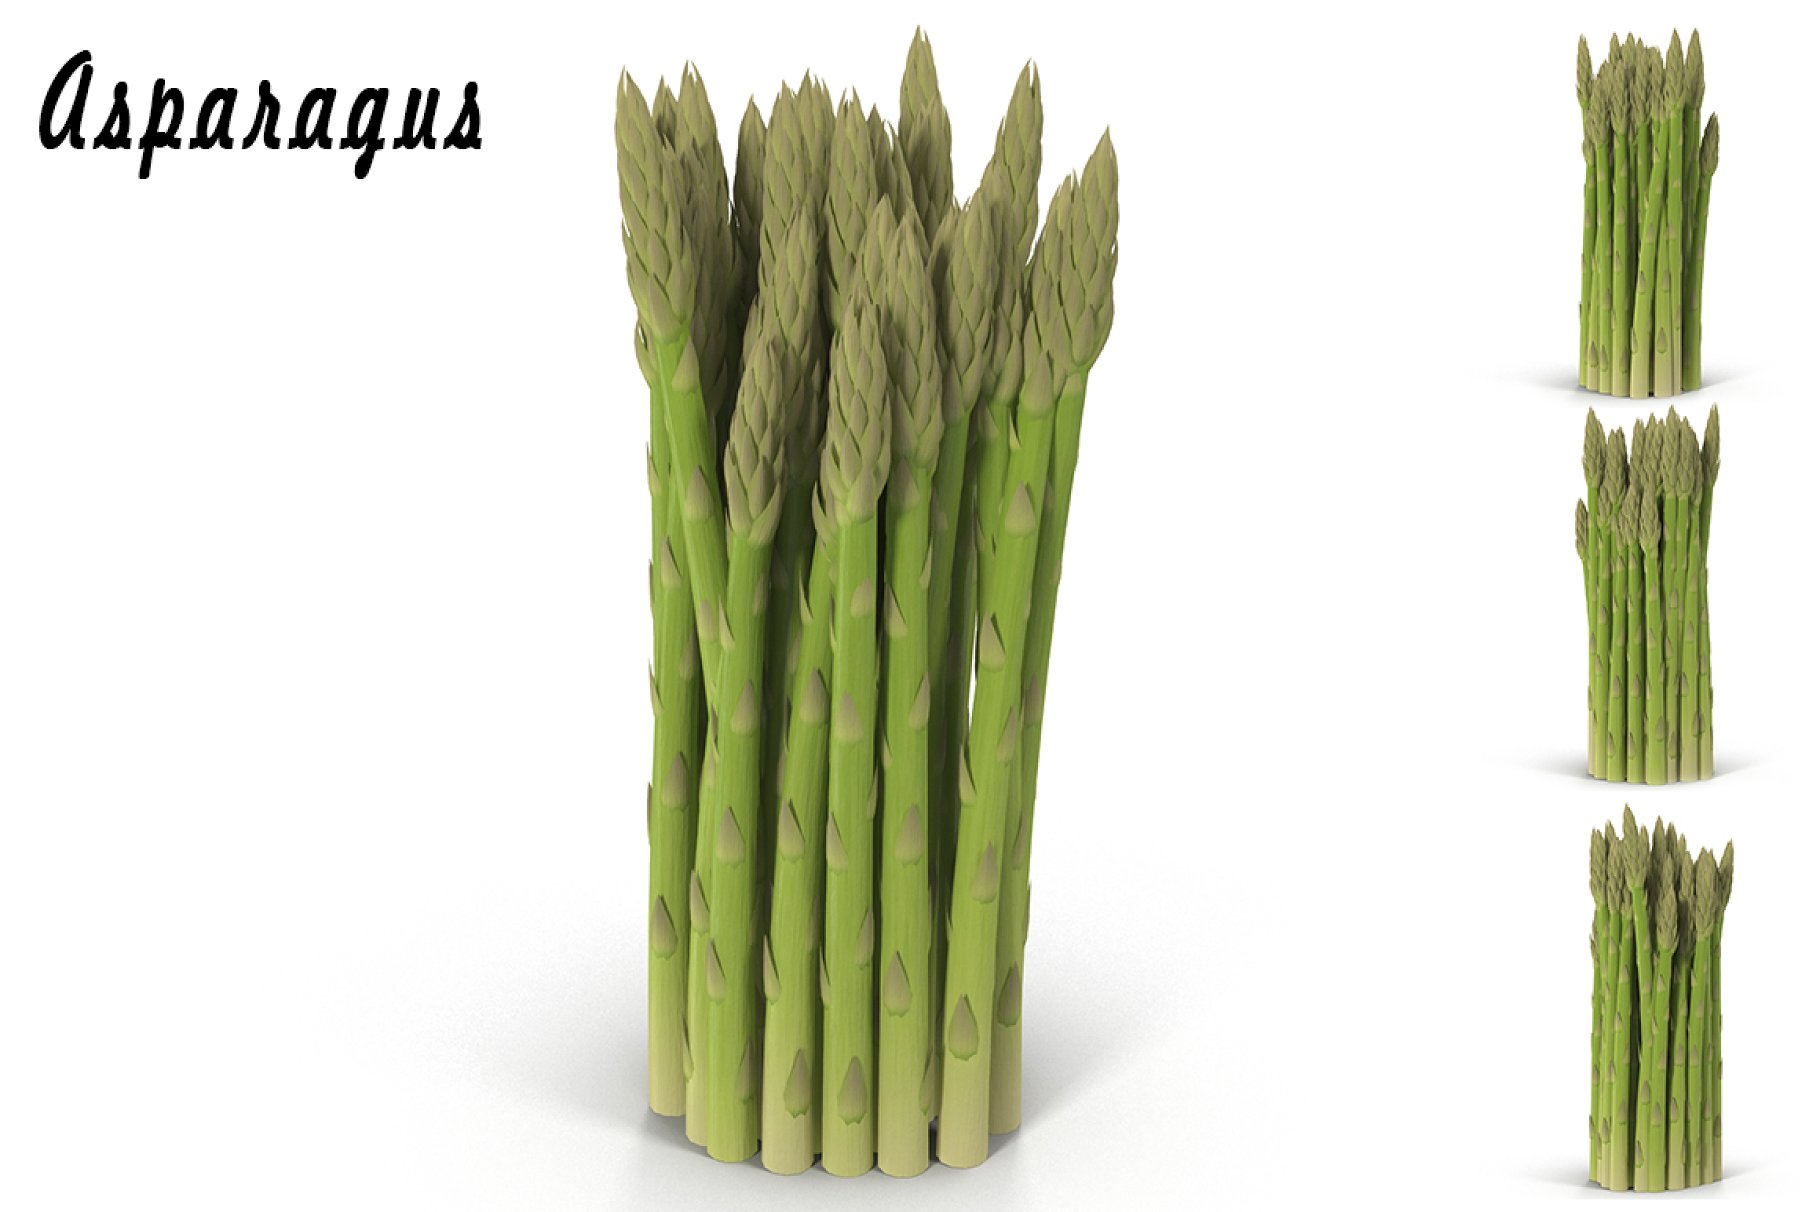 The image of spikelets of asparagus.